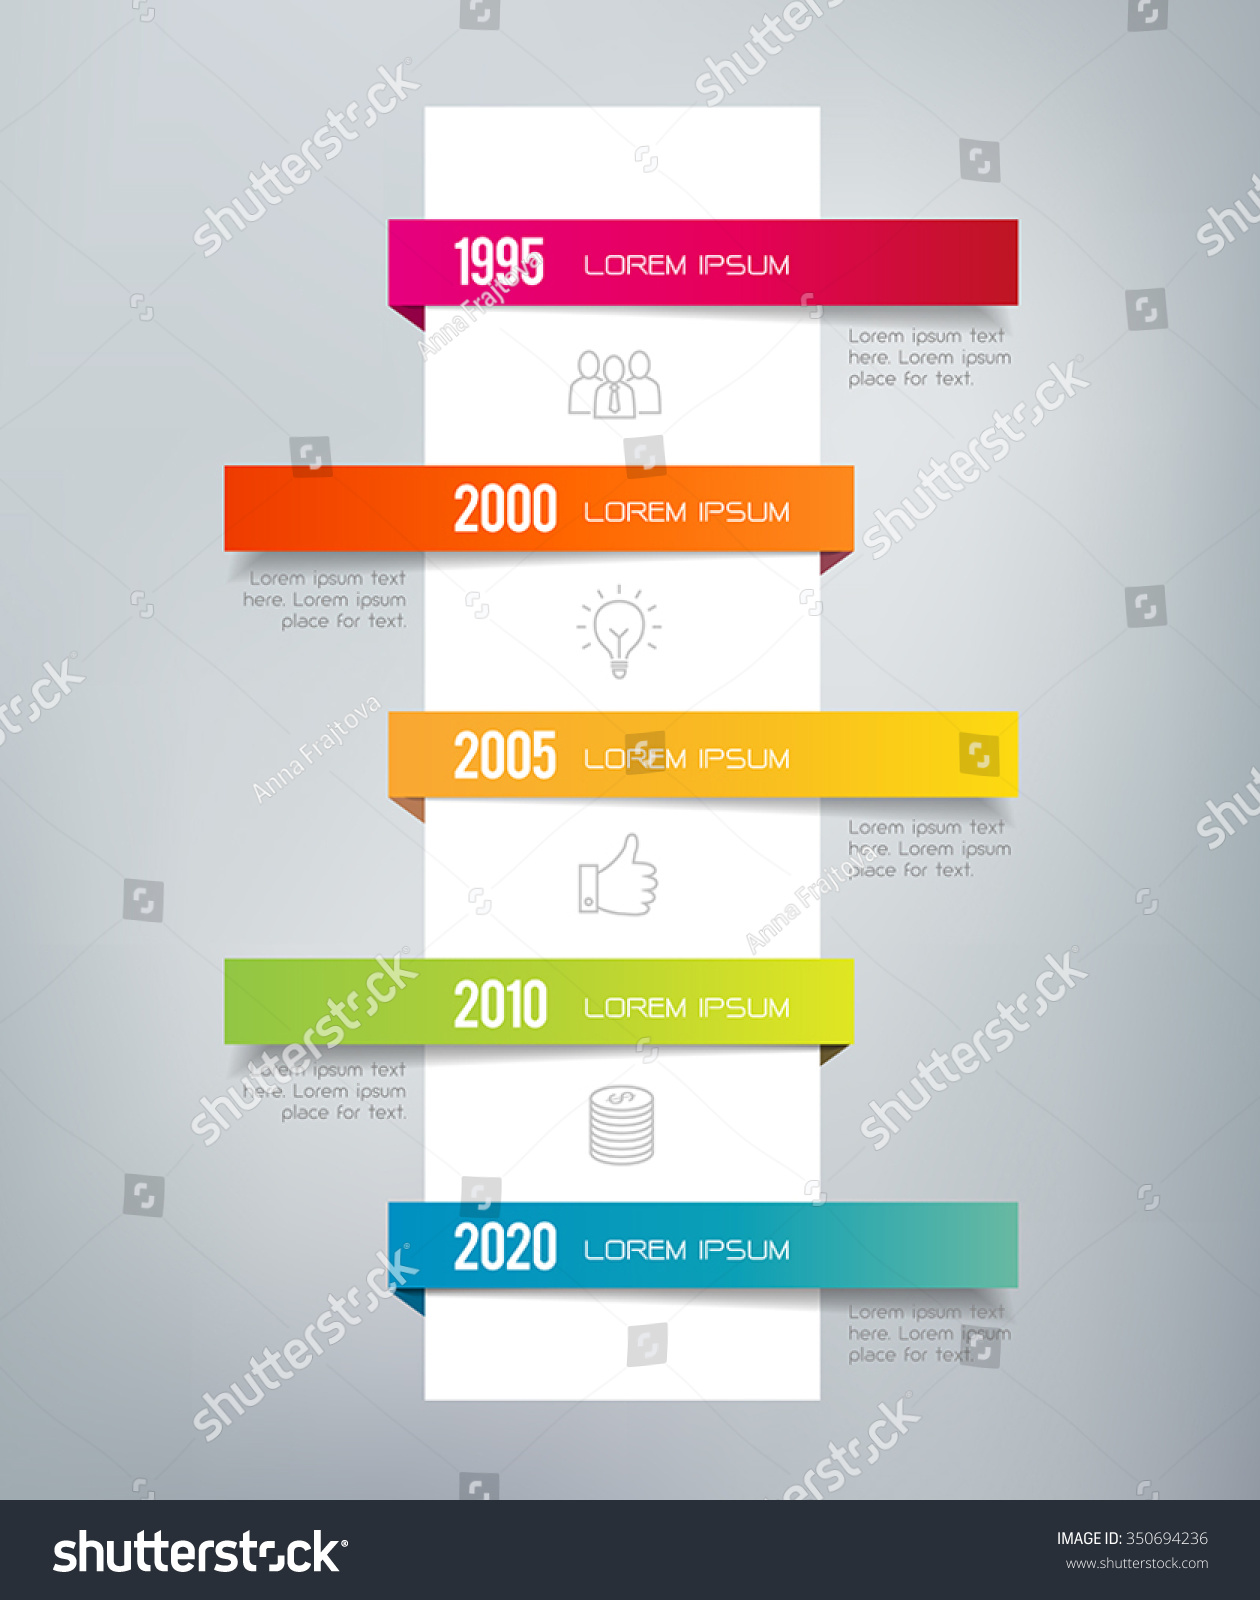 infographic timeline can illustrate strategy workflow